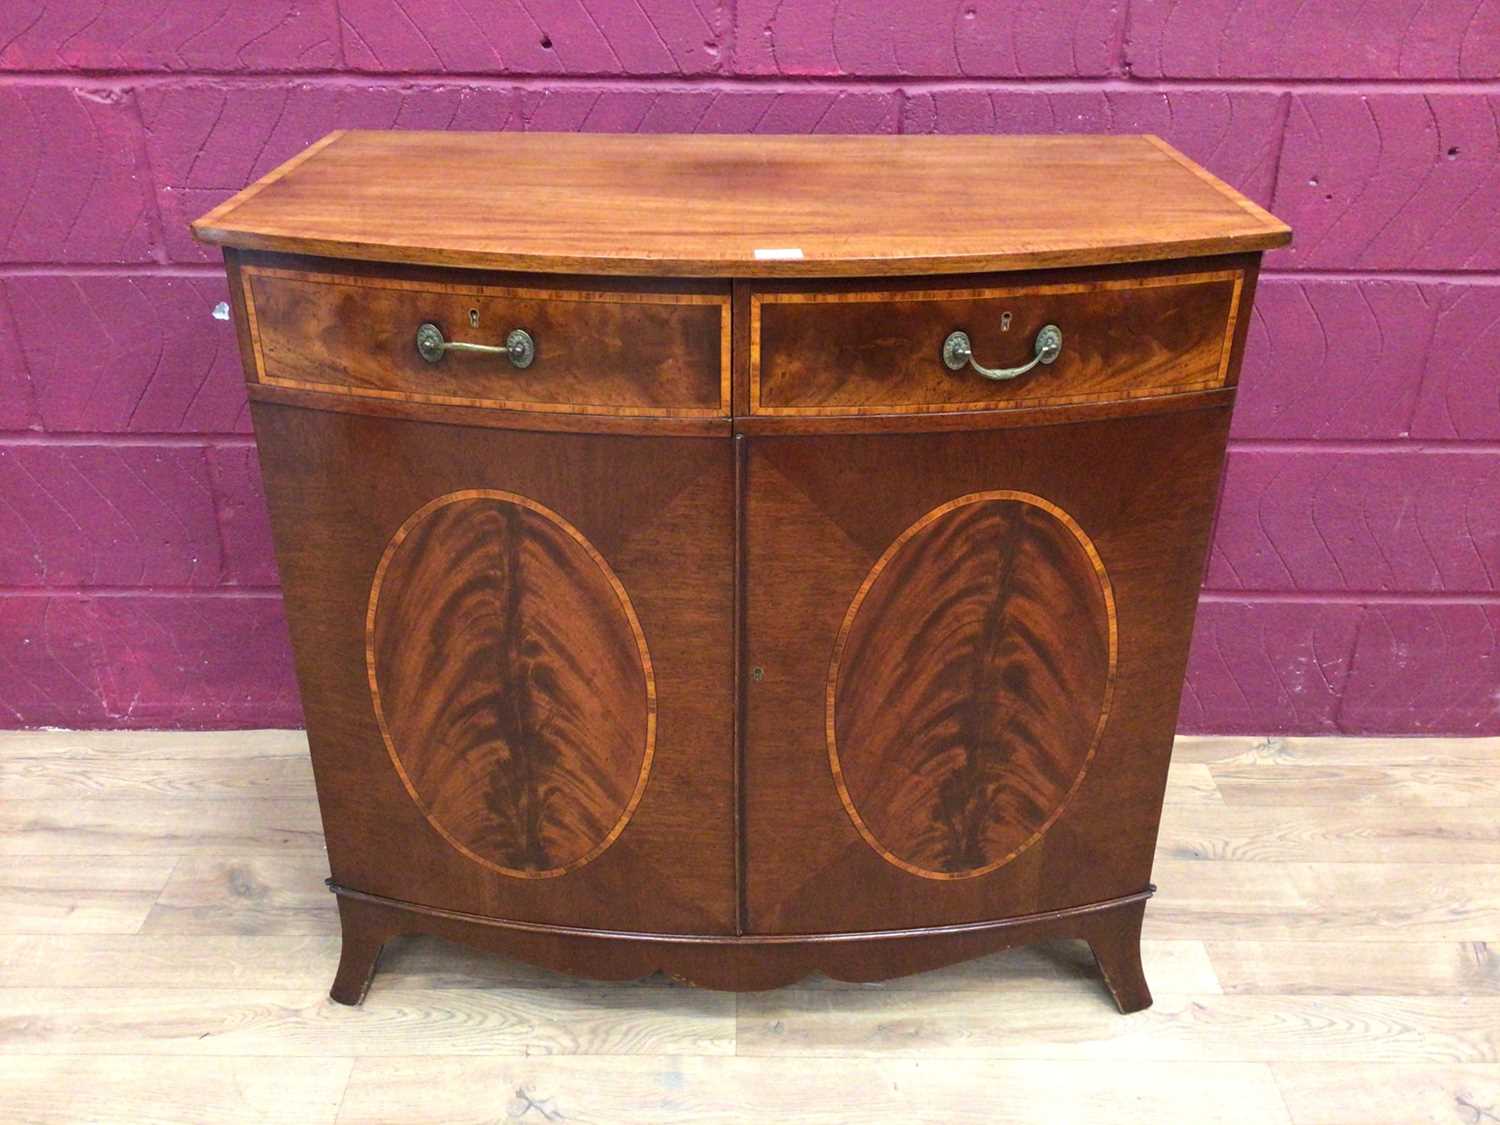 Lot 384 - Fine quality bowfront mahogany cabinet with Belling warming oven